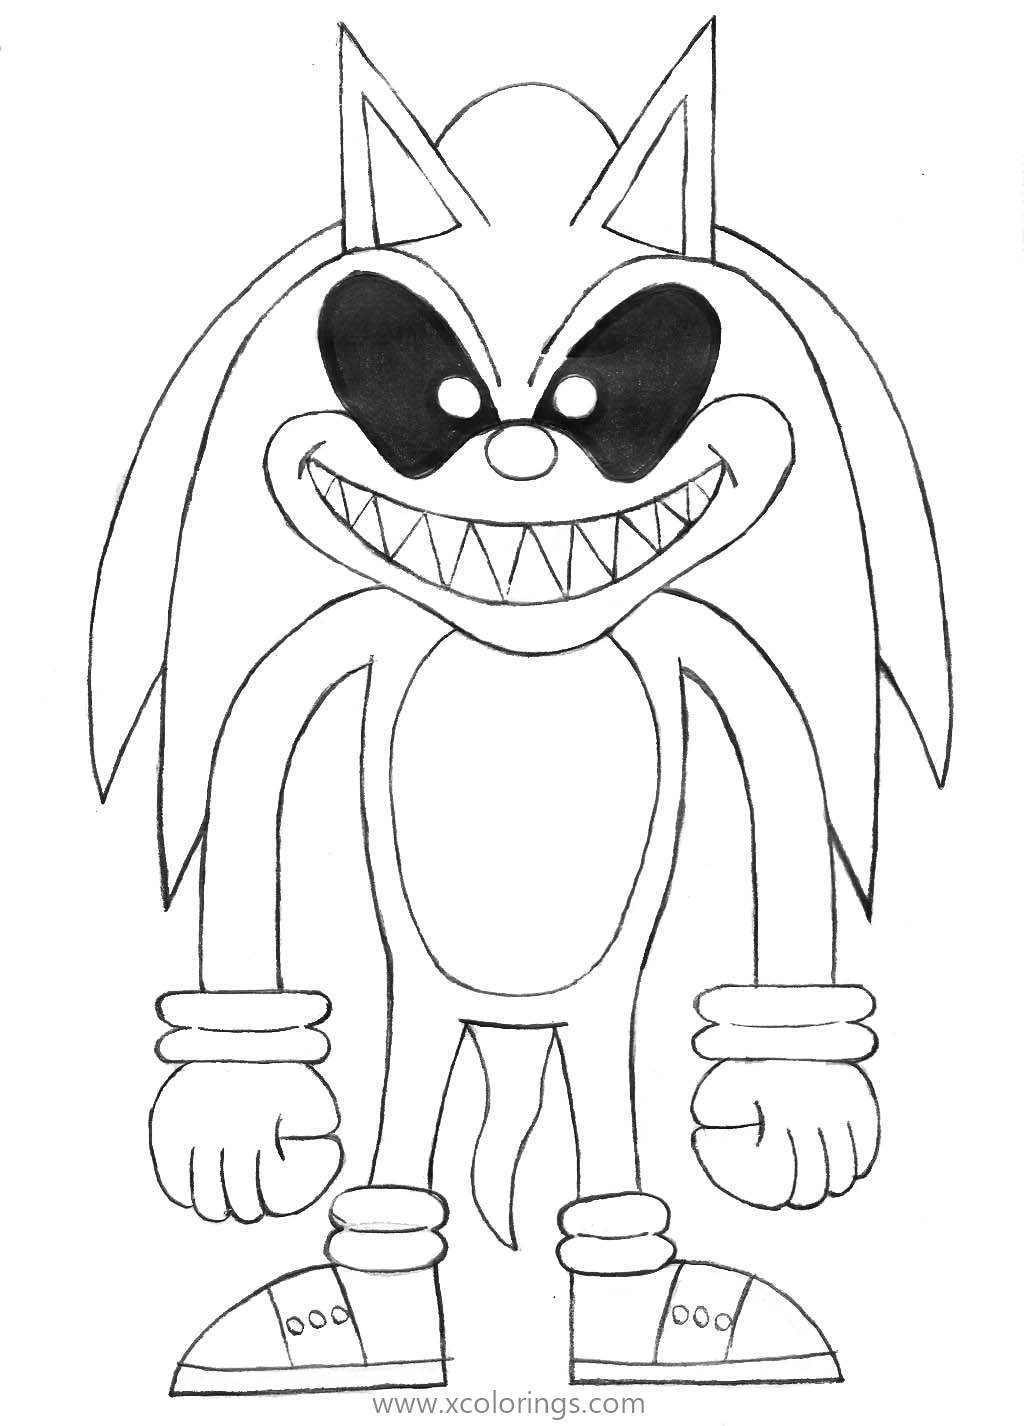 Printable Sonic Exe Coloring Pages Printable Blank World